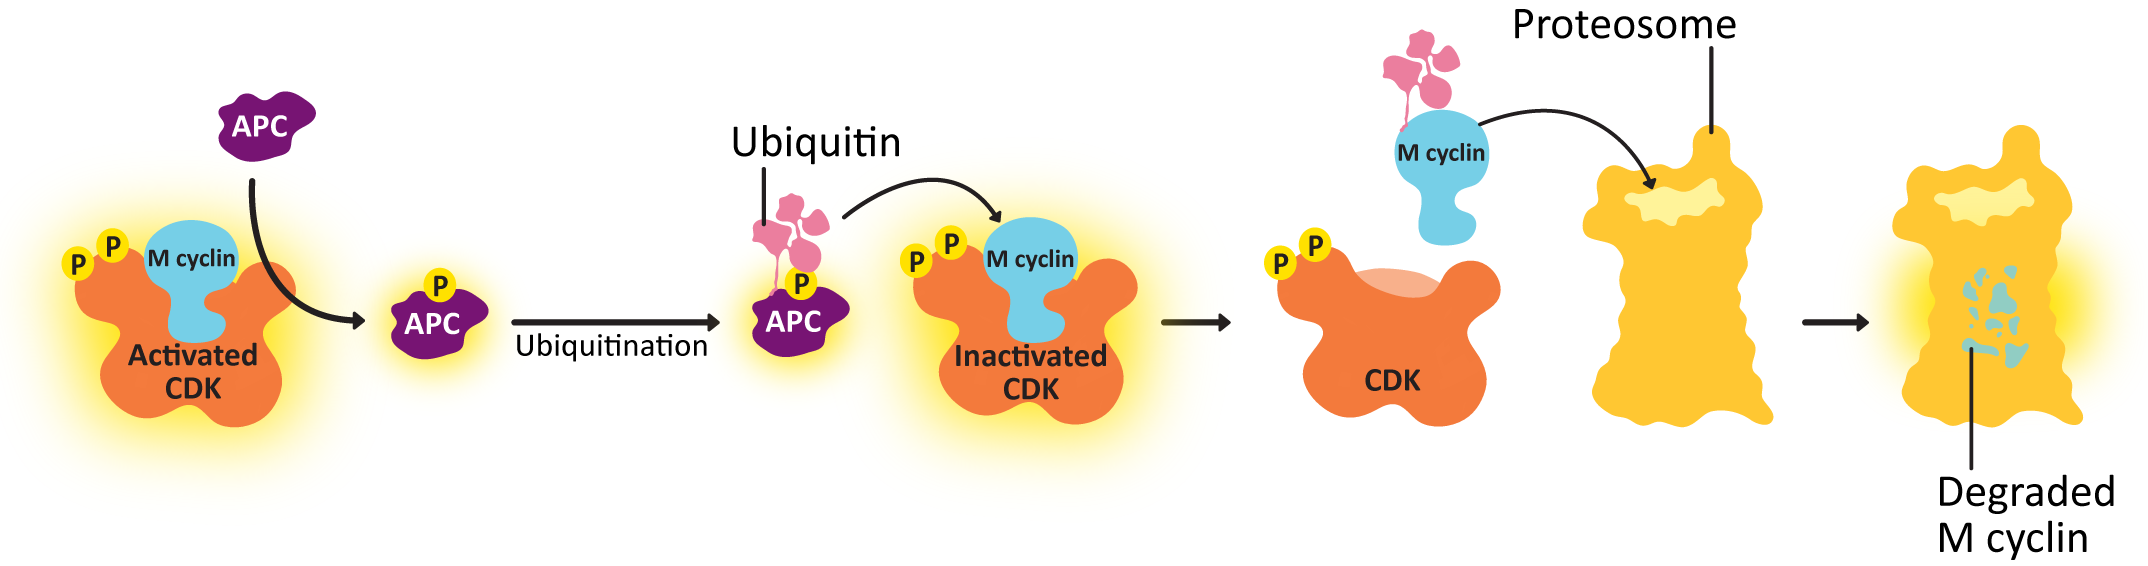 The ubiquitination and degradation of cyclin